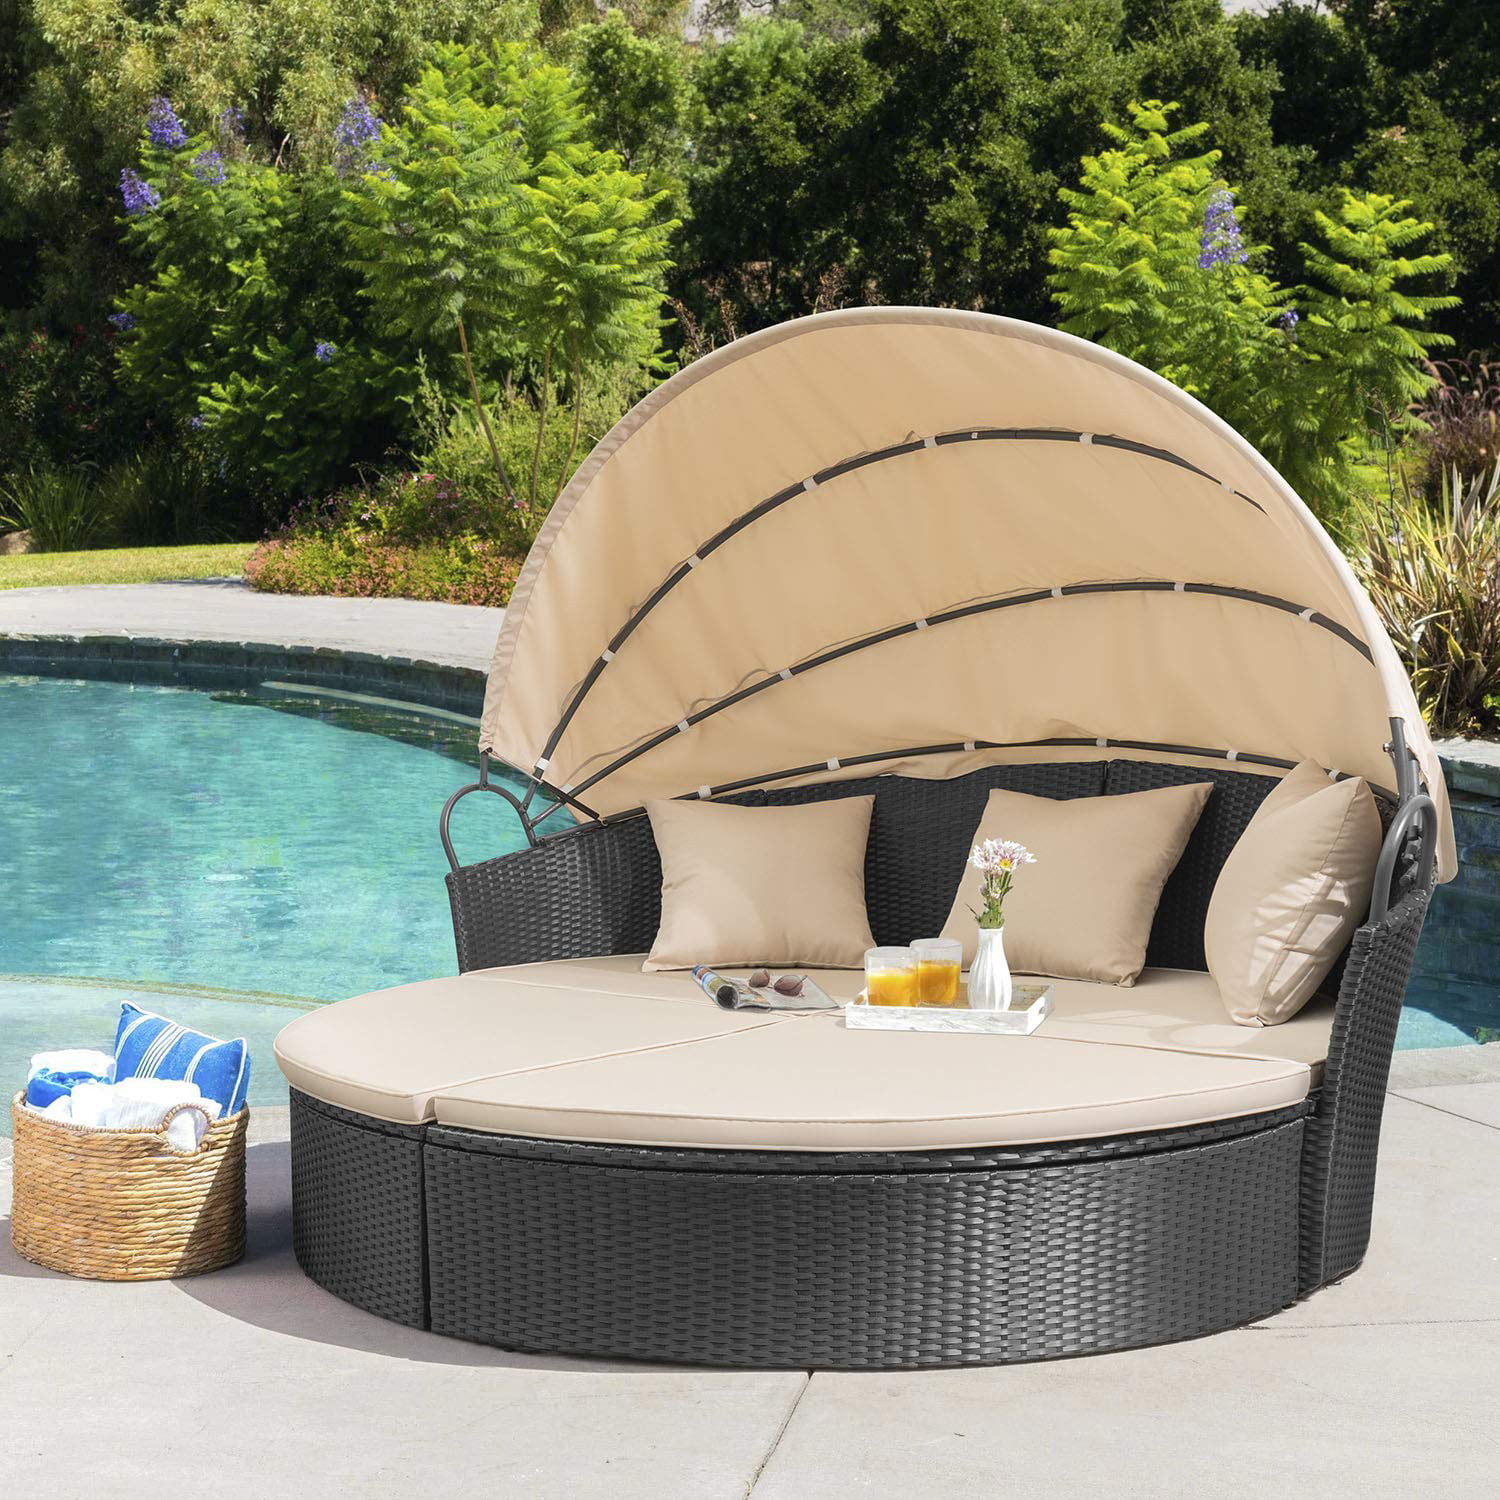 Lacoo Outdoor Patio Round Daybed With, Round Outdoor Lounge Chair With Canopy